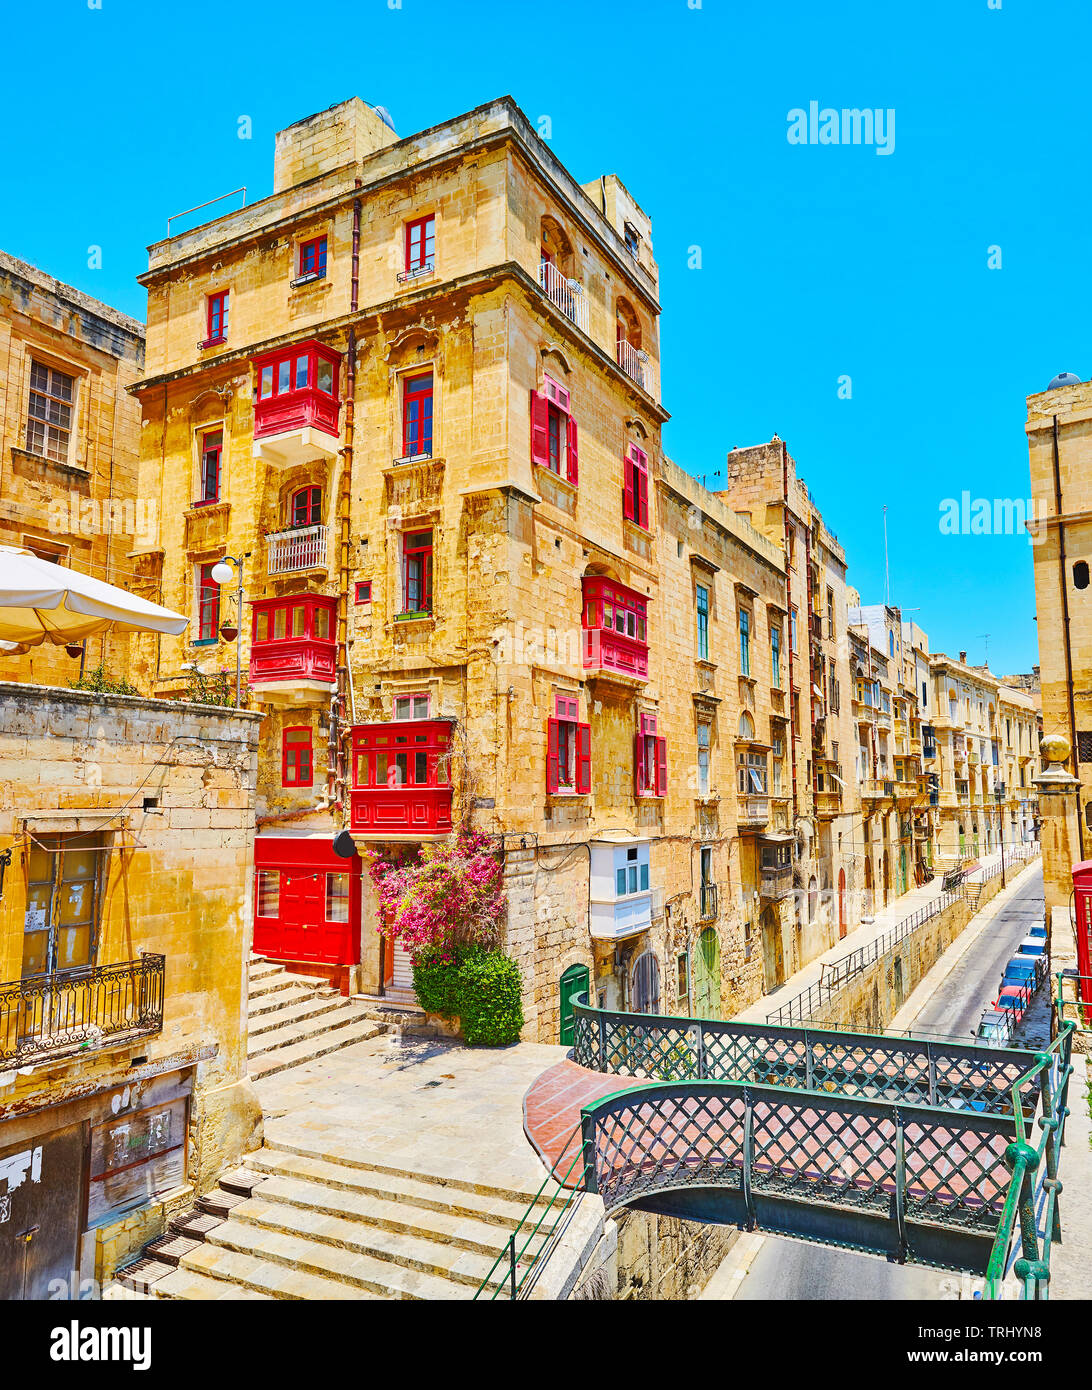 The tiny pedestrian bridge, connecting old town with medieval fortifications, stretches above Liesse street, Valletta, Malta. Stock Photo